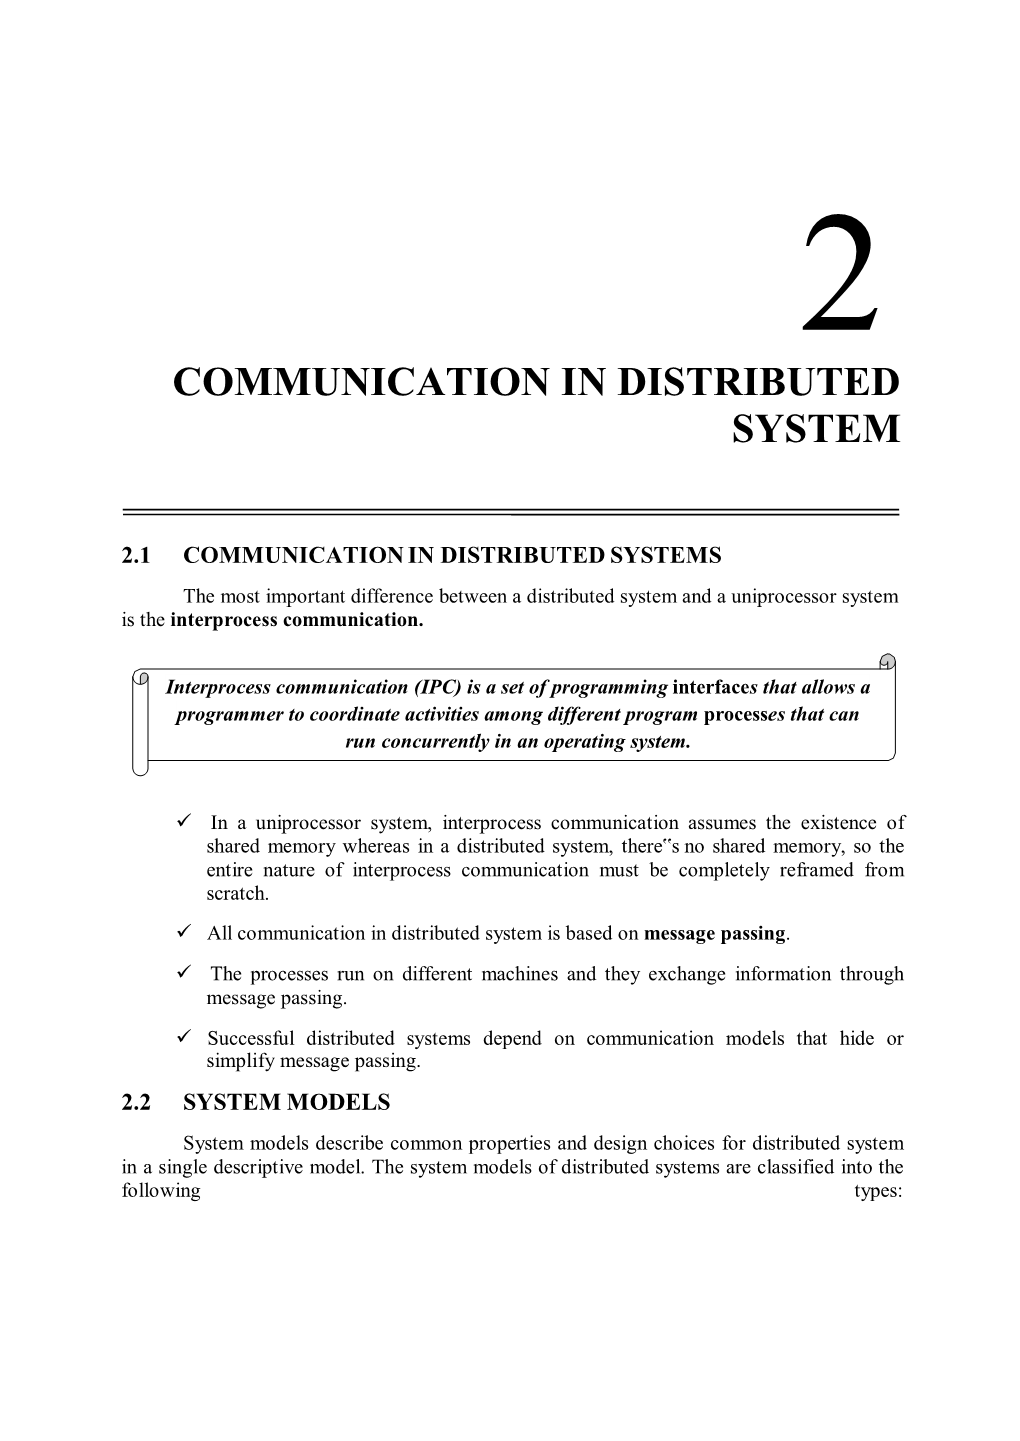 Communication in Distributed System